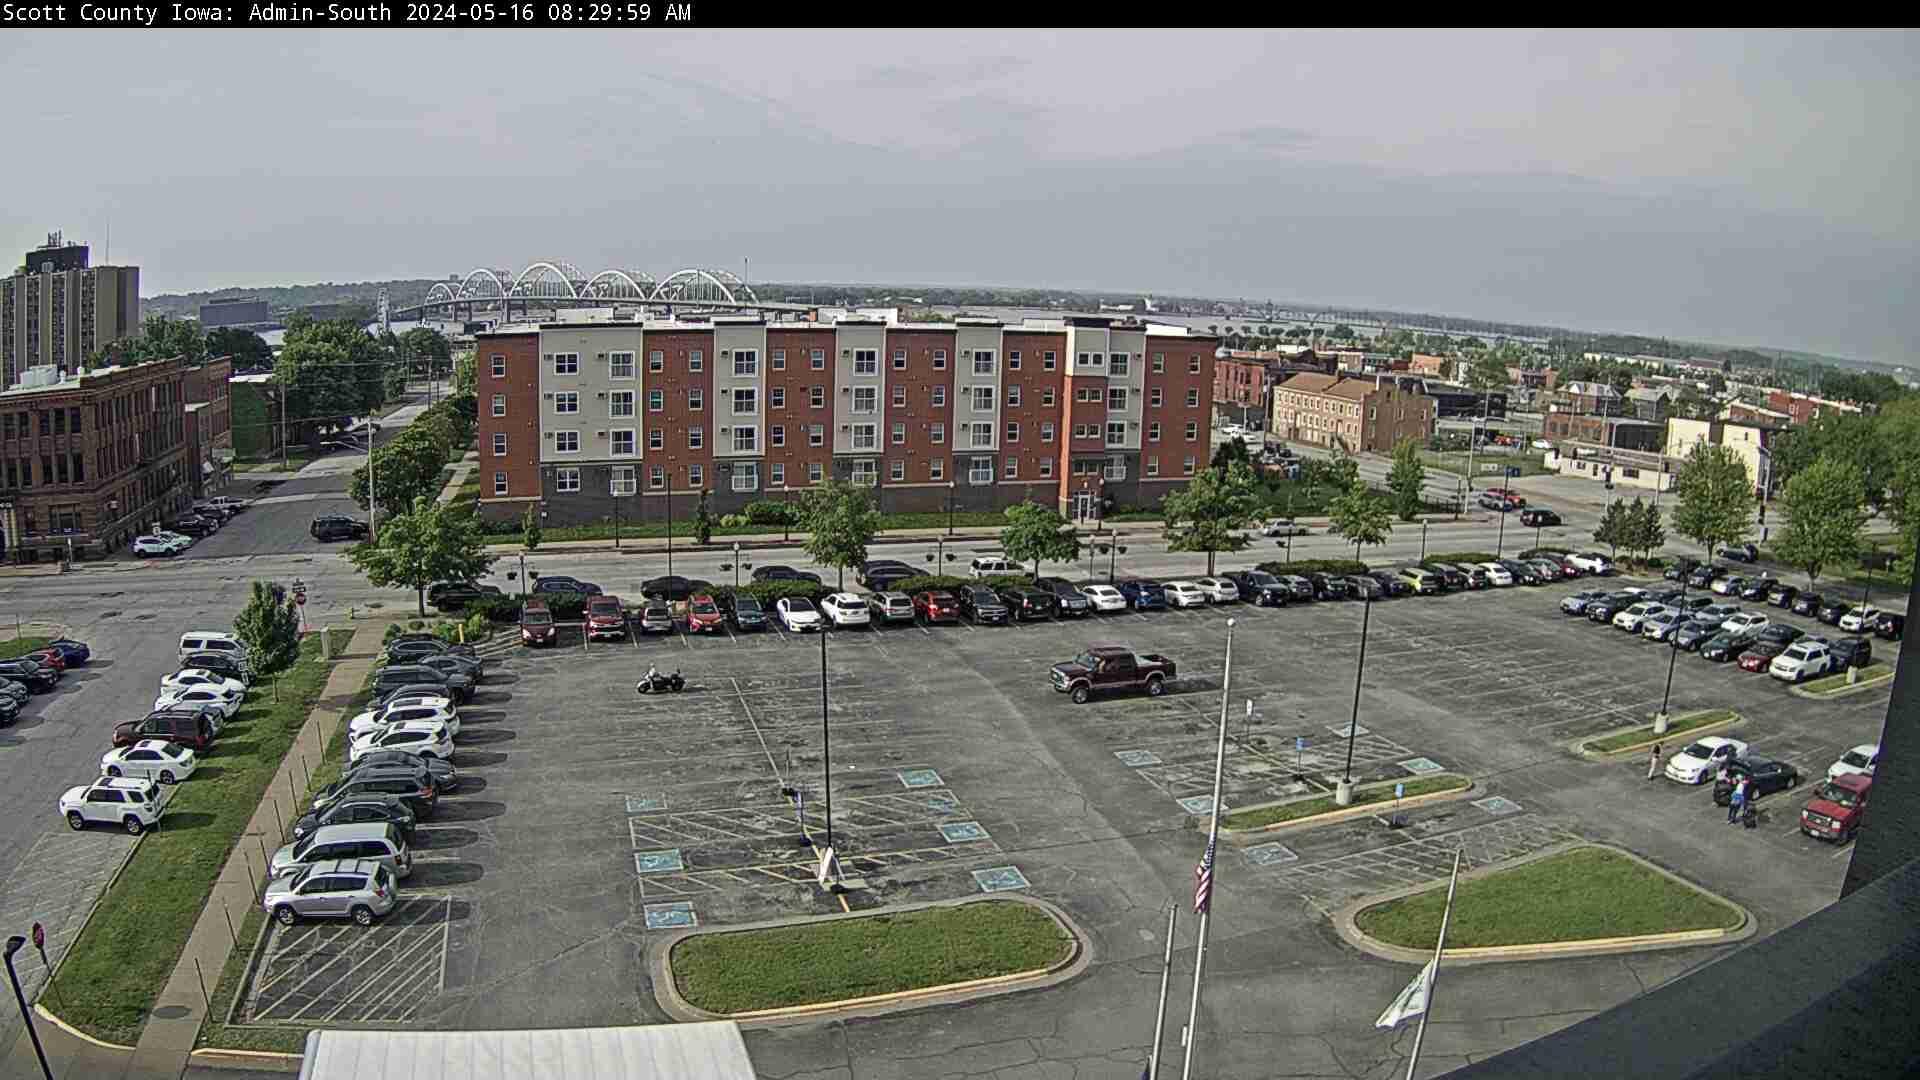 Webcam view from Admin Center looking south.